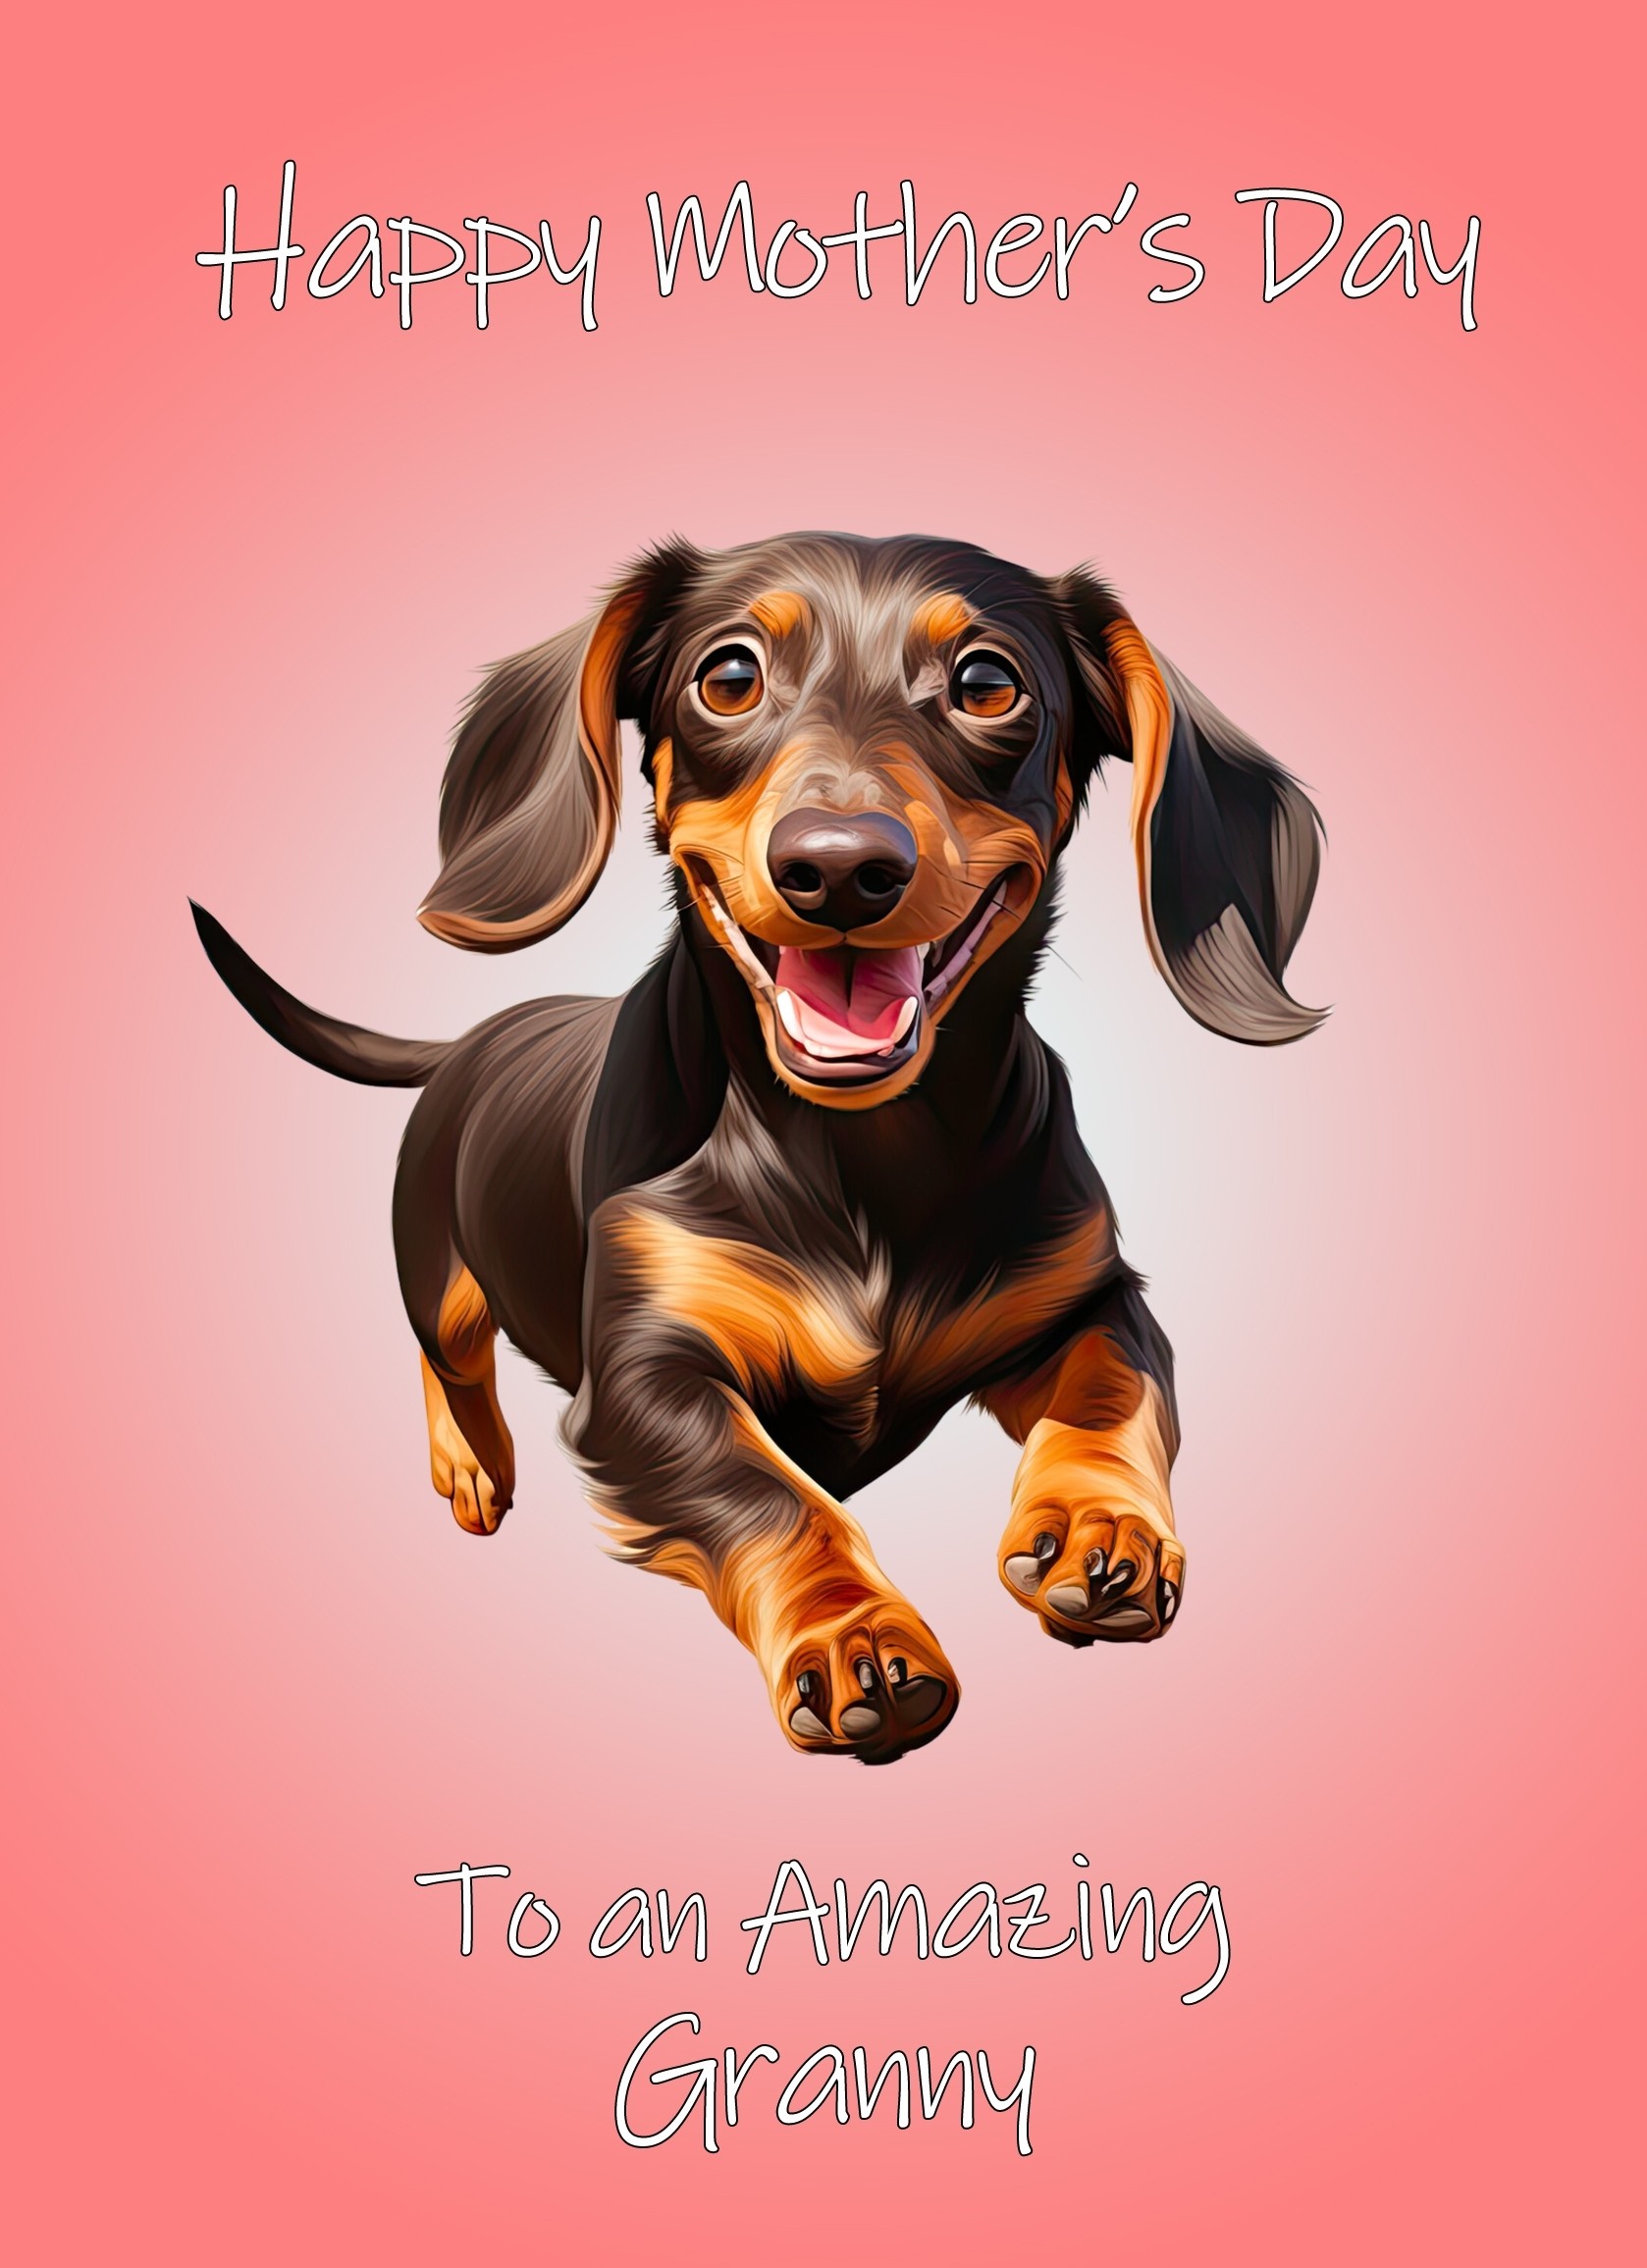 Dachshund Dog Mothers Day Card For Granny